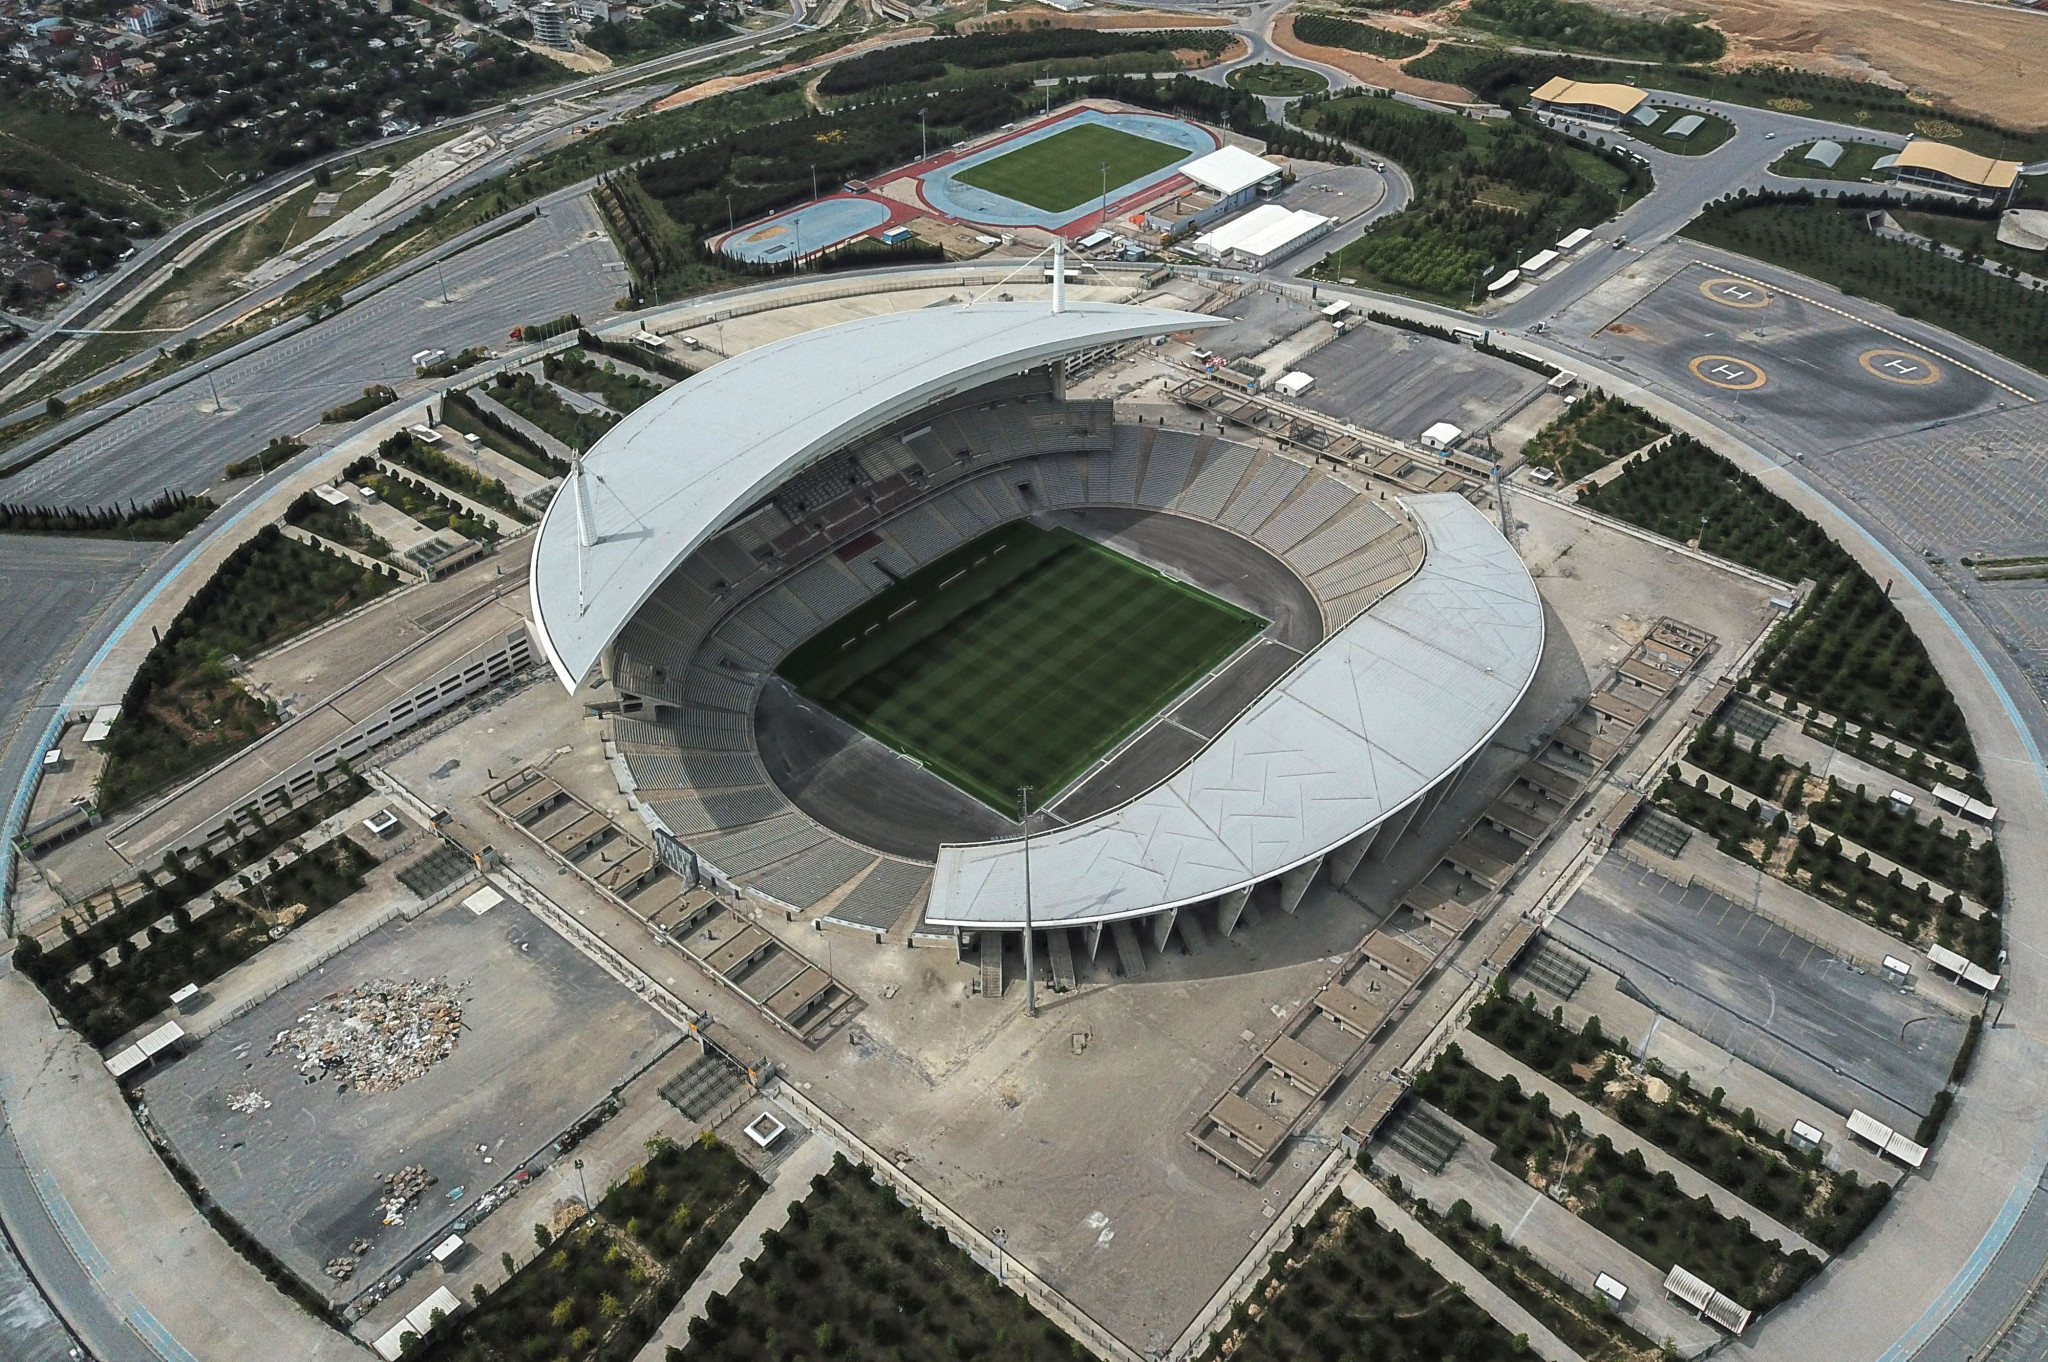 The Atatürk Olympic Stadium, which was originally built for Istanbul's failed bid for the 2008 Olympic Games, could be the focal point of a 2036 attempt © Getty Images